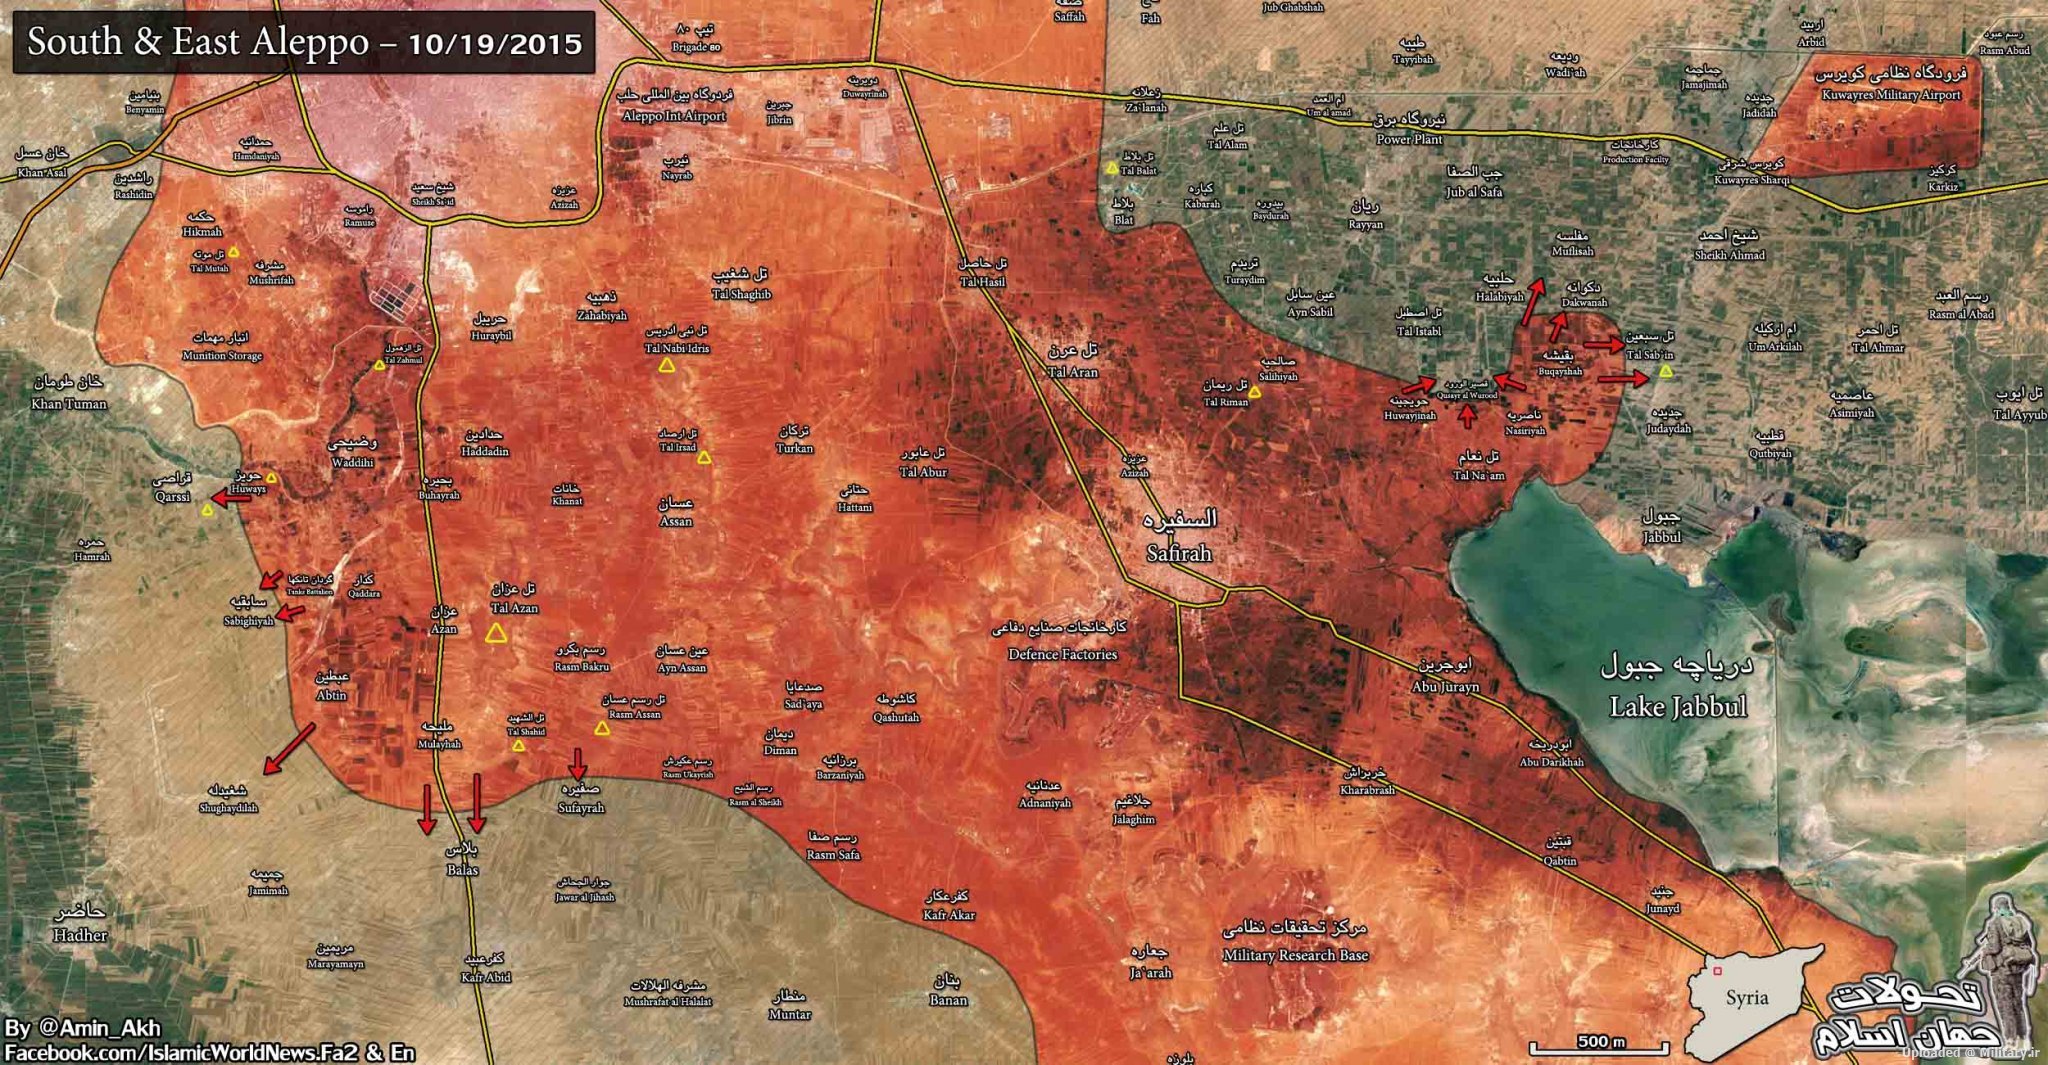 South_East_Aleppo_500m_19oct_low.jpg